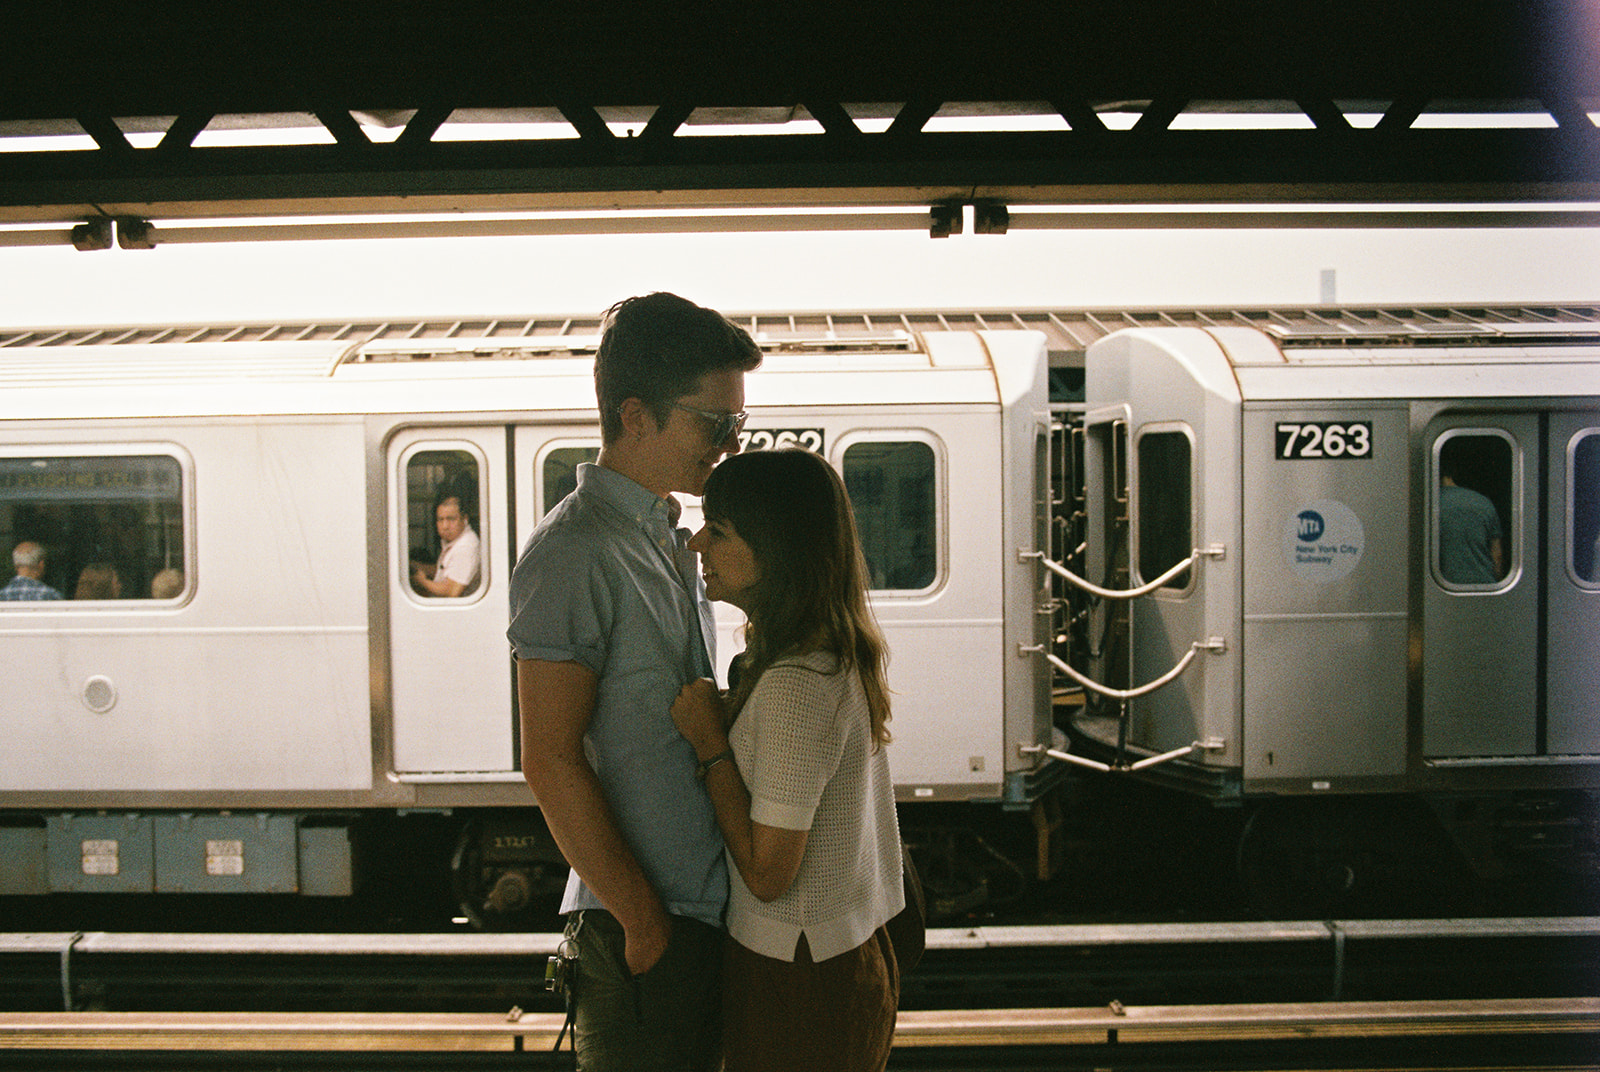 couple on subway in new york kelsey justice photography